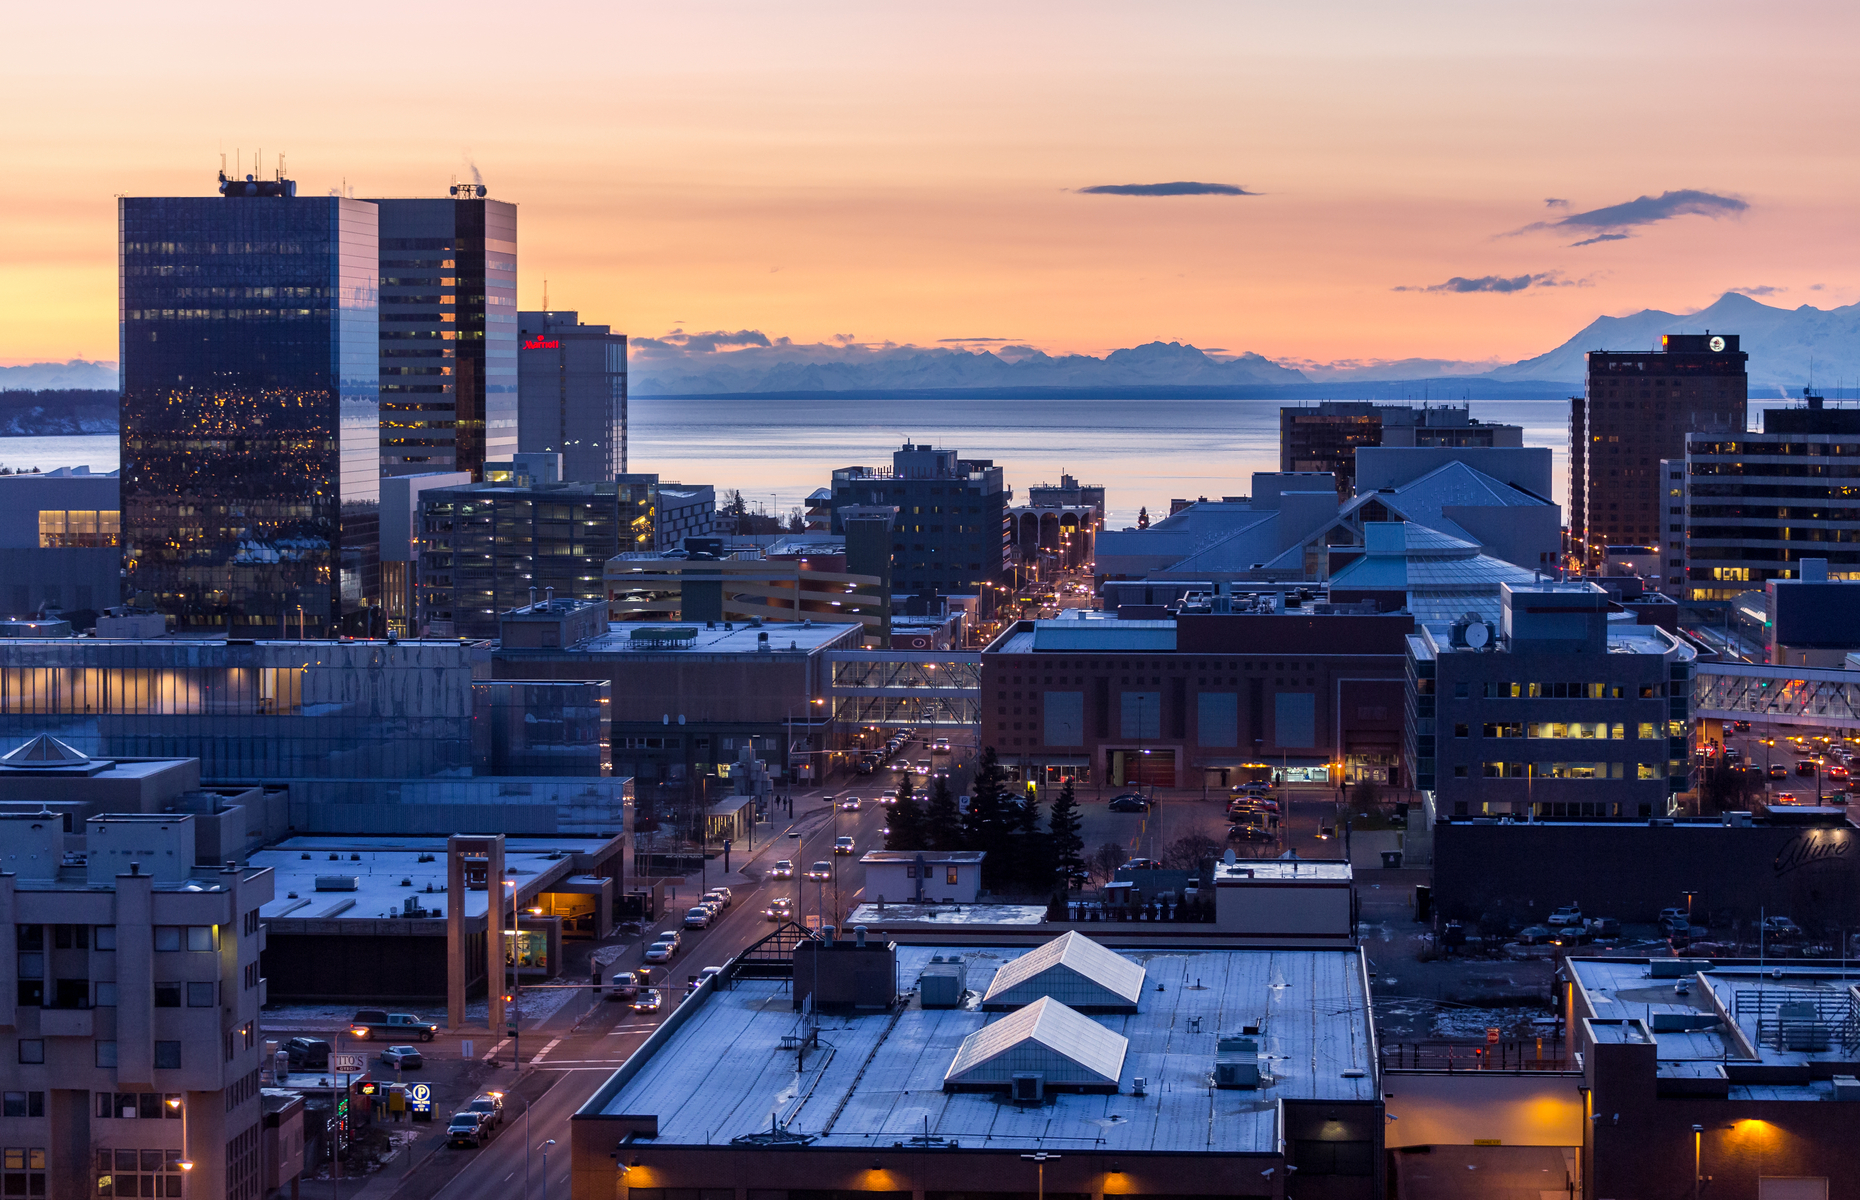 Downtown Anchorage (Image: Marcus Biastock/Shutterstock)